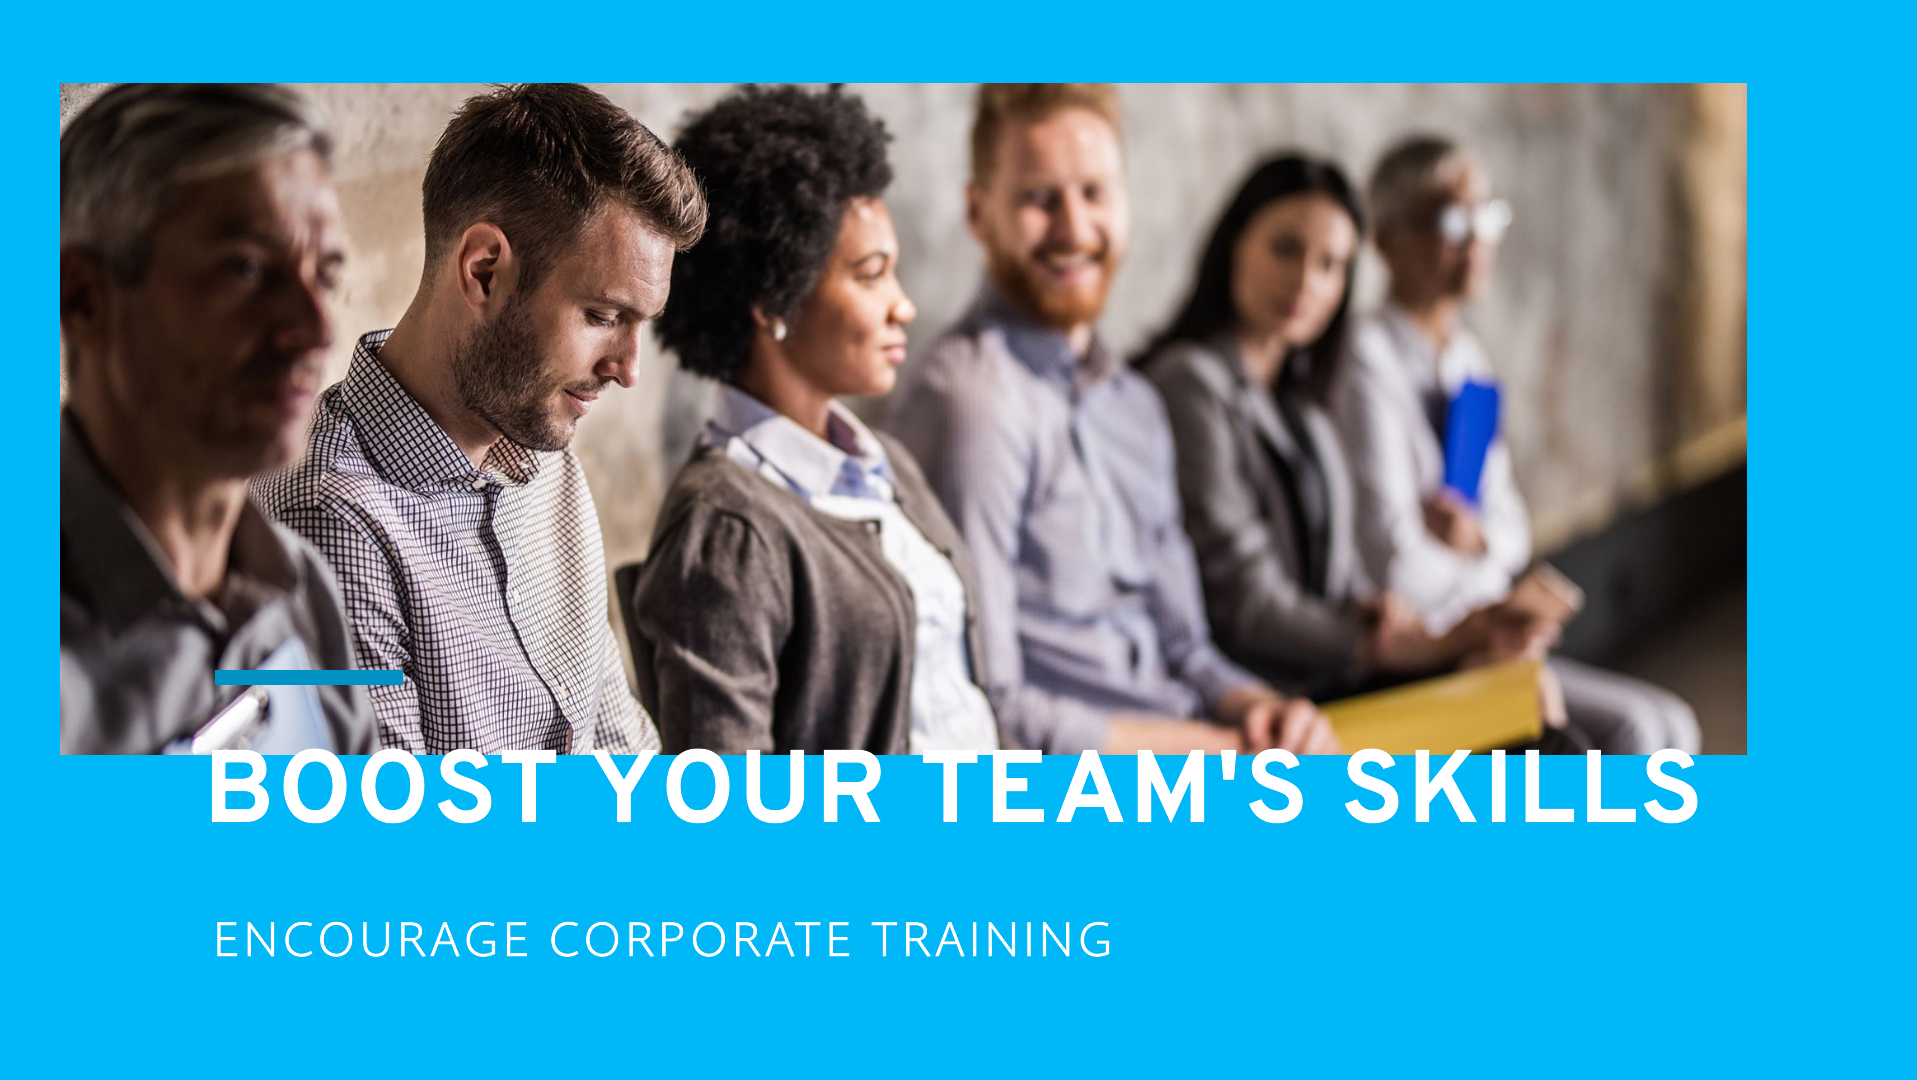 How Managers Can Encourage Employees to Participate in Corporate Training Programs